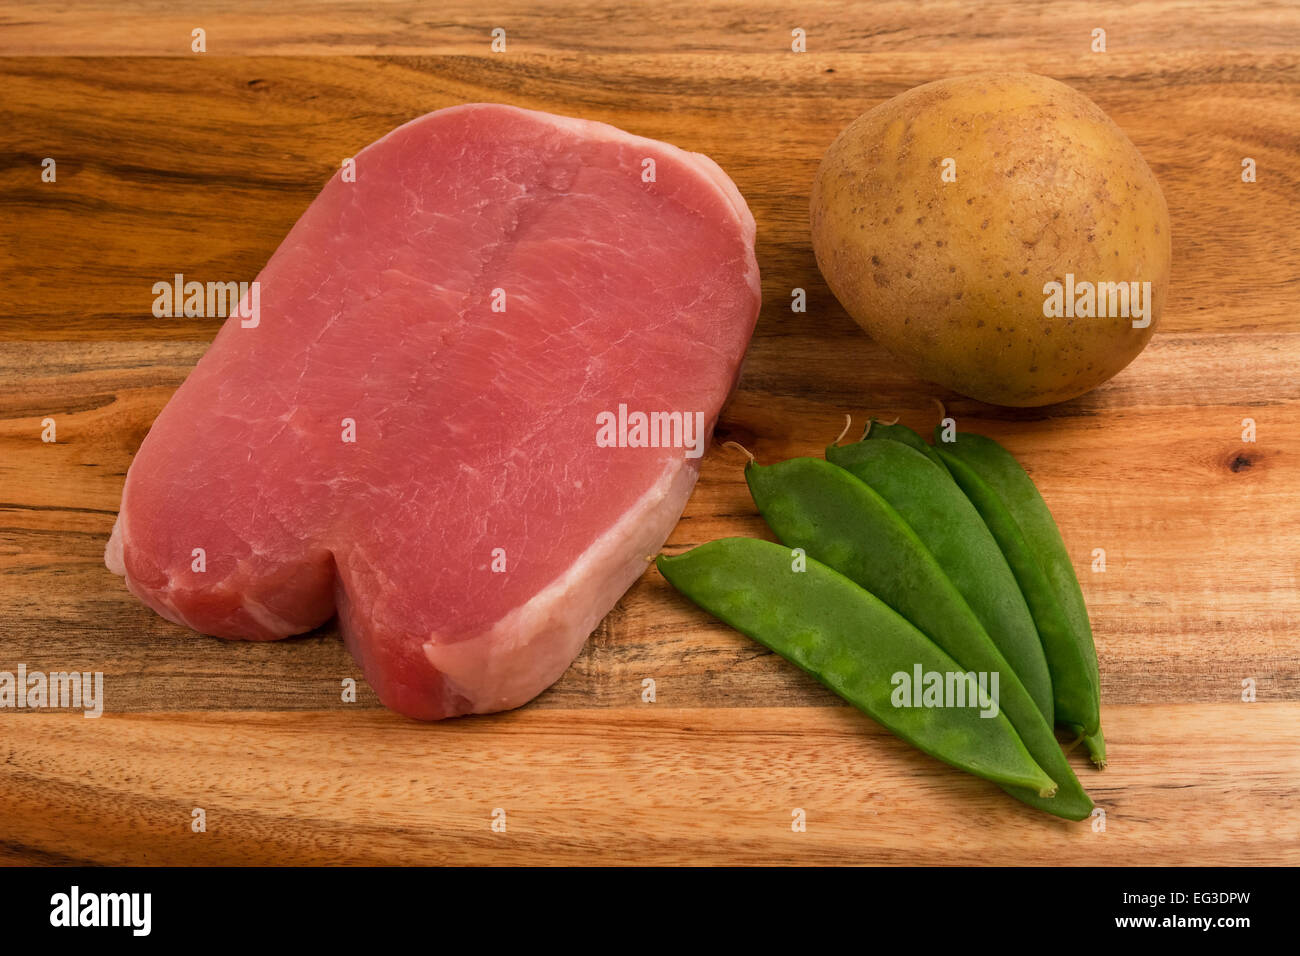 pork chop uncooked on a chopping board with peas and a whole uncooked potato medium closeup studio shot Stock Photo